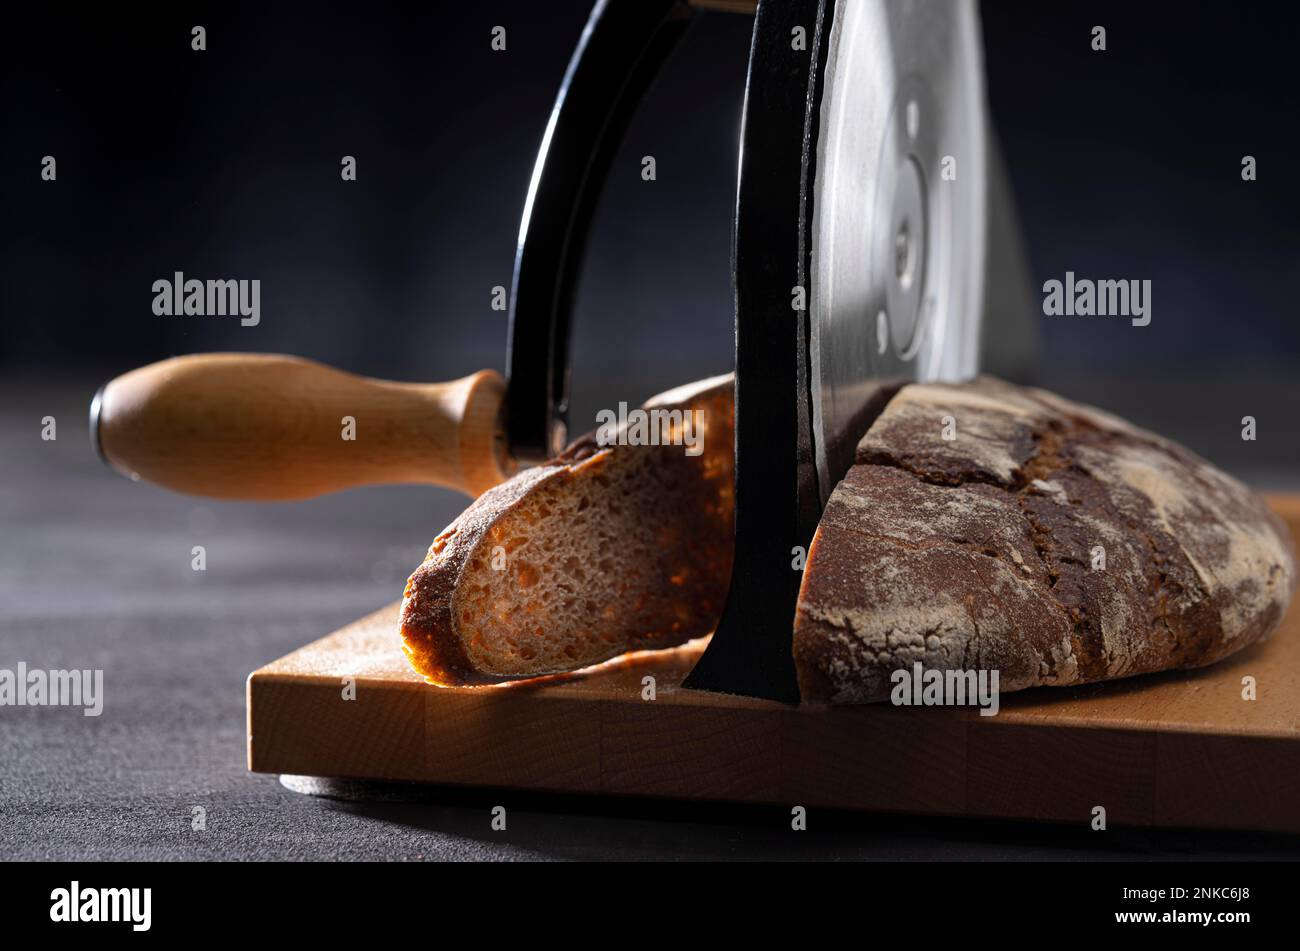 https://c8.alamy.com/comp/2NKC6J8/mixed-bread-with-hand-operated-bread-slicer-2NKC6J8.jpg